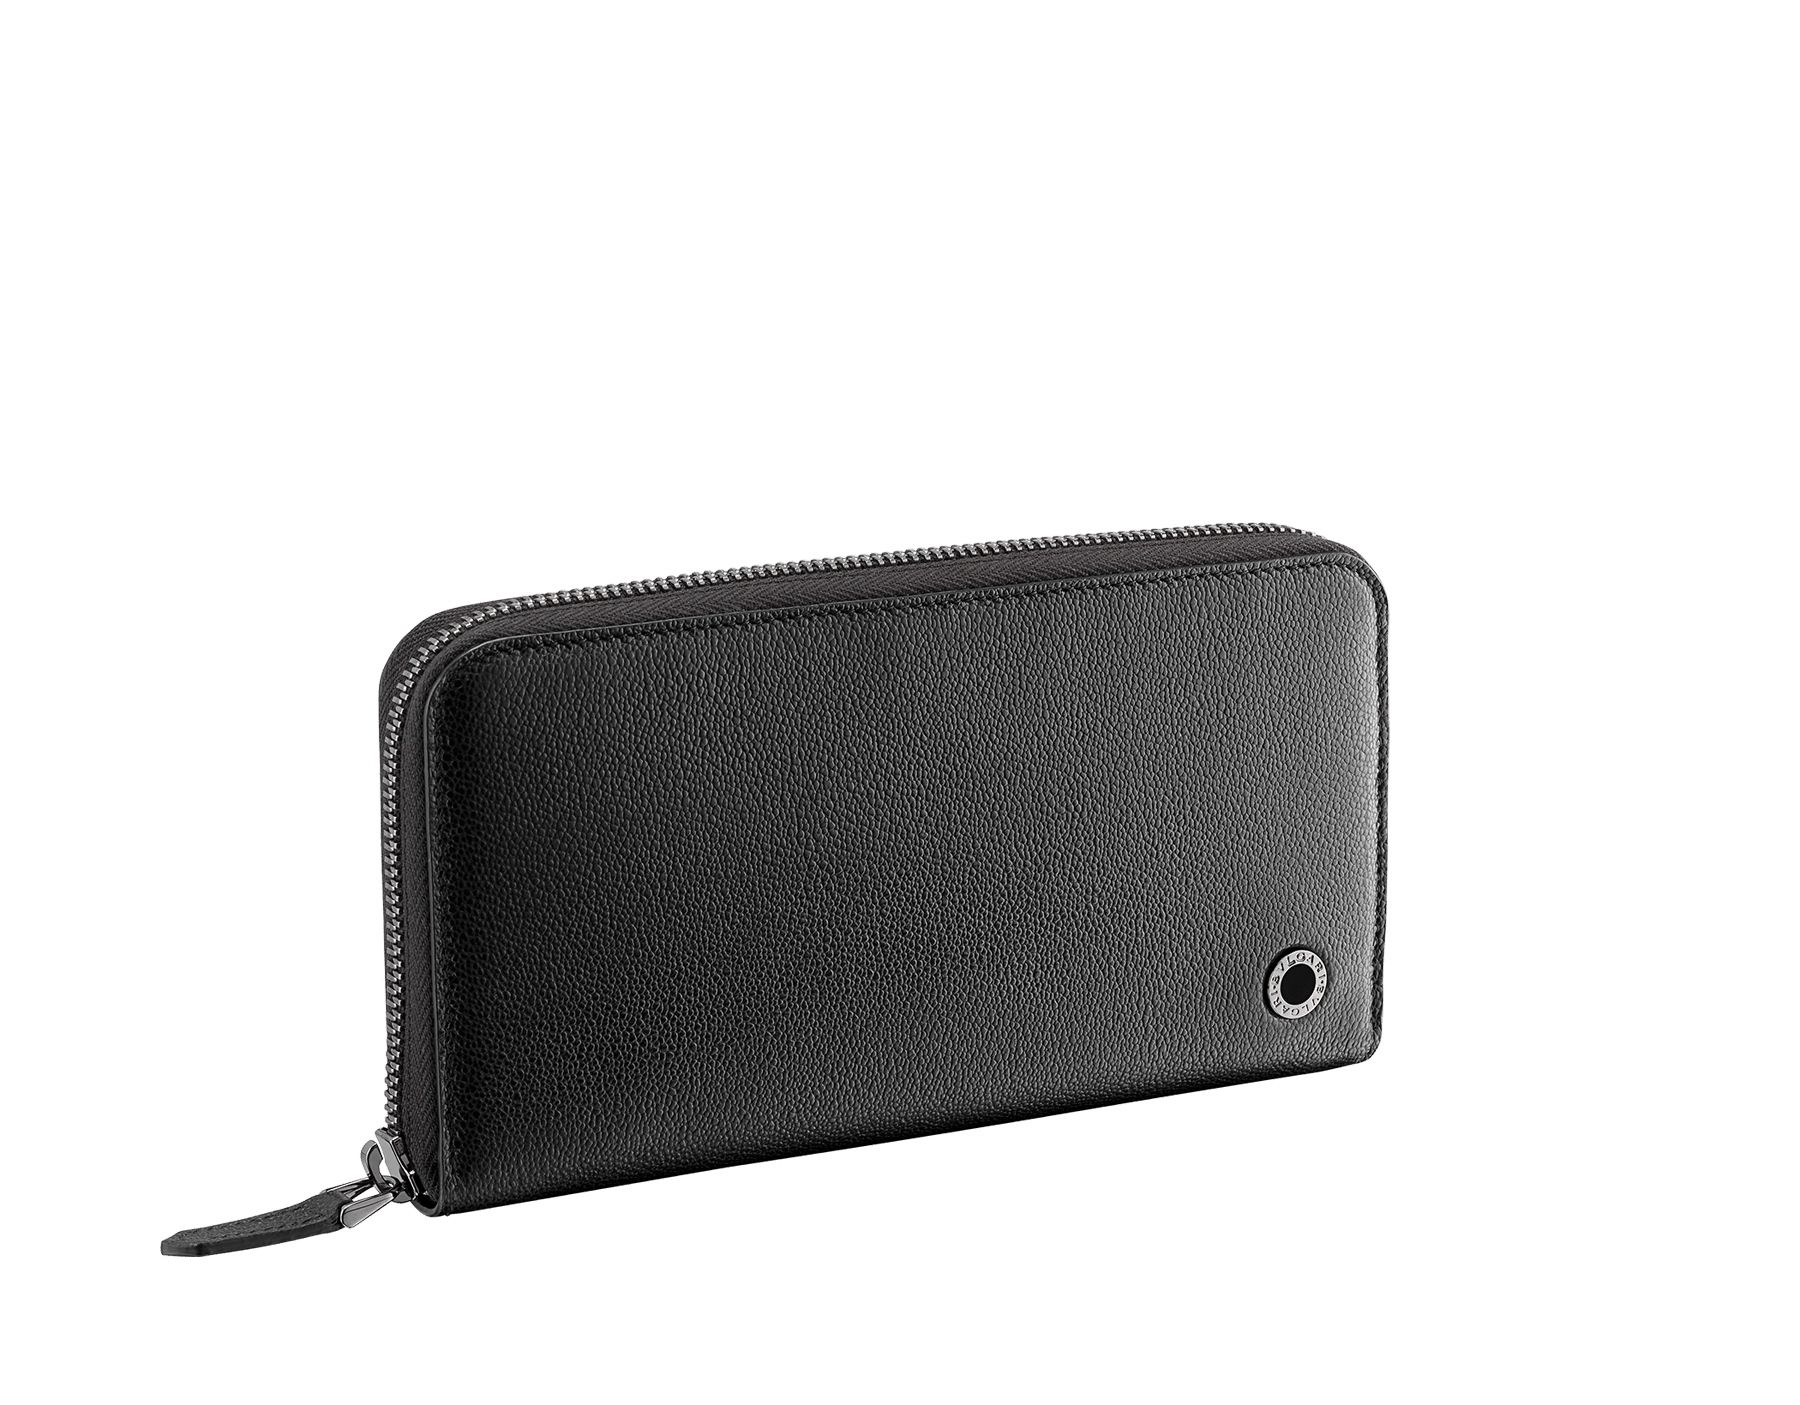 "BVLGARI BVLGARI" men's large zipped wallet in black and Forest Emerald green "Urban" grain calf leather. Iconic logo embellishment in dark ruthenium-plated brass with black enamelling. BBM-WLTZIPASYM image 1